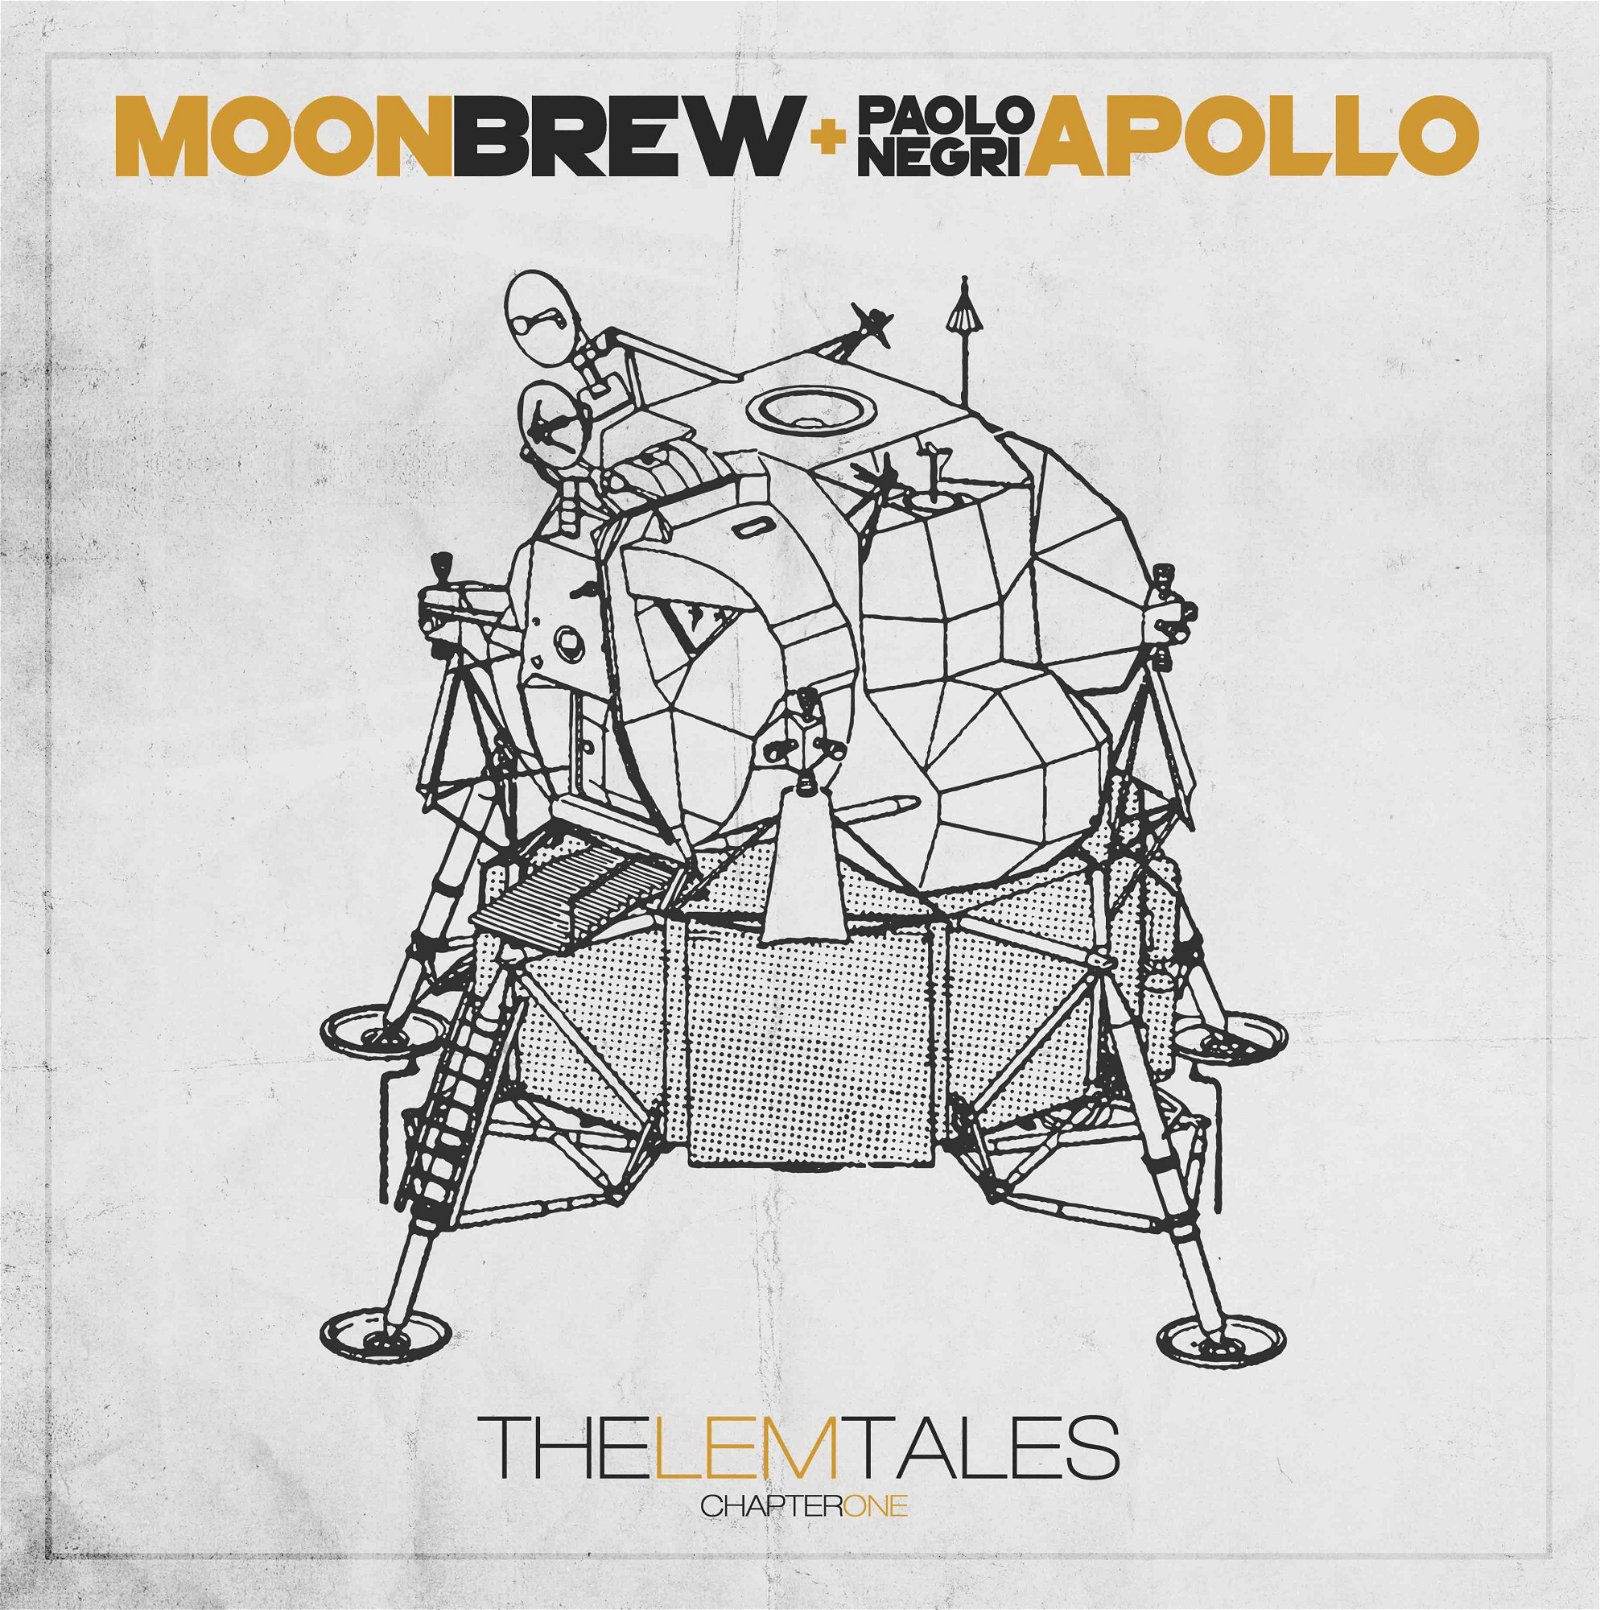 CD Shop - MOONBREW & PAOLO APOLLO N LEM TALES - CHAPTER ONE